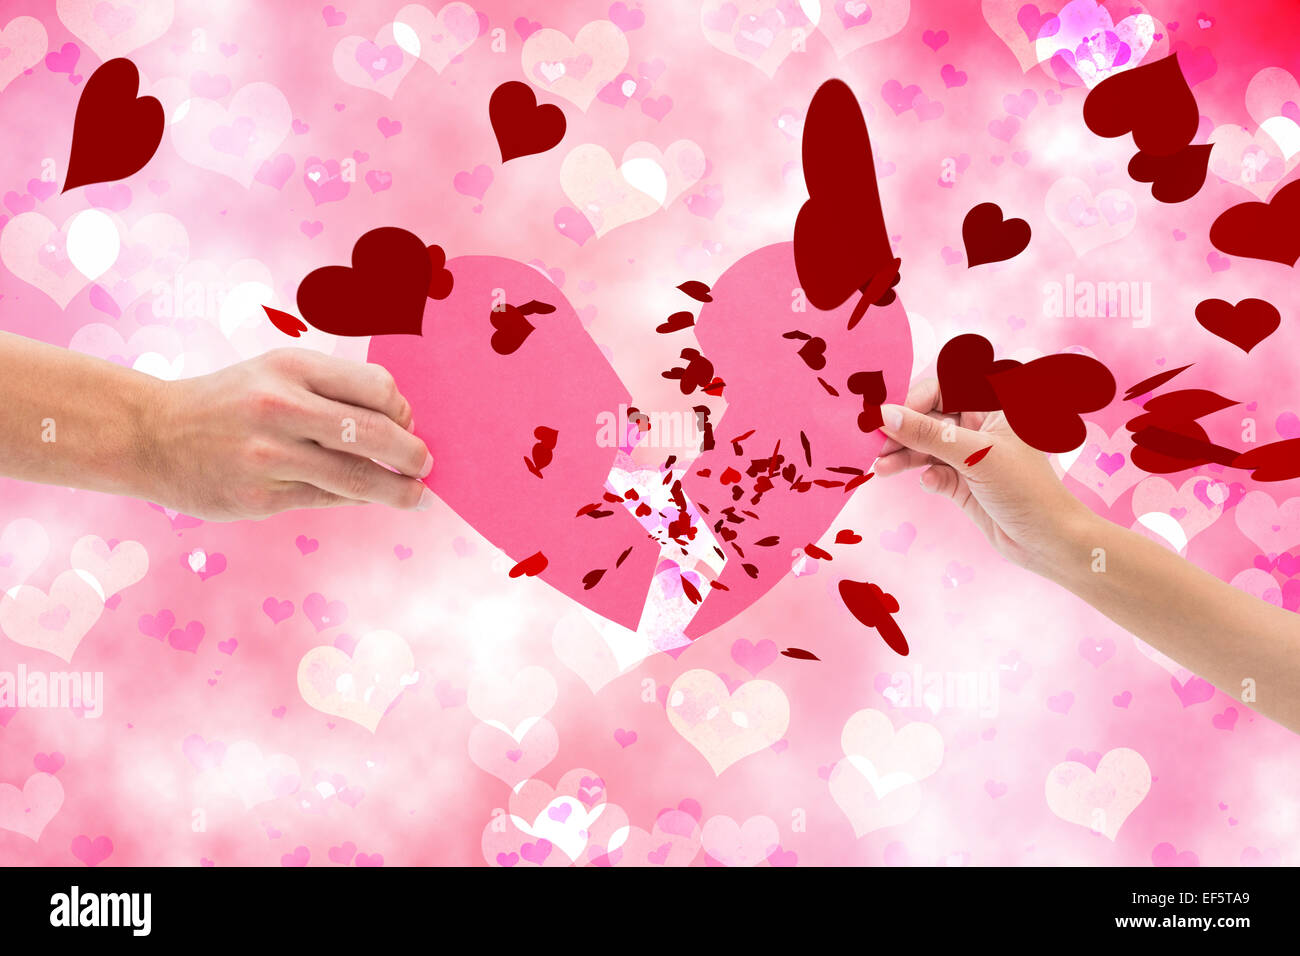 Composite image of hands holding two halves of broken heart Stock Photo